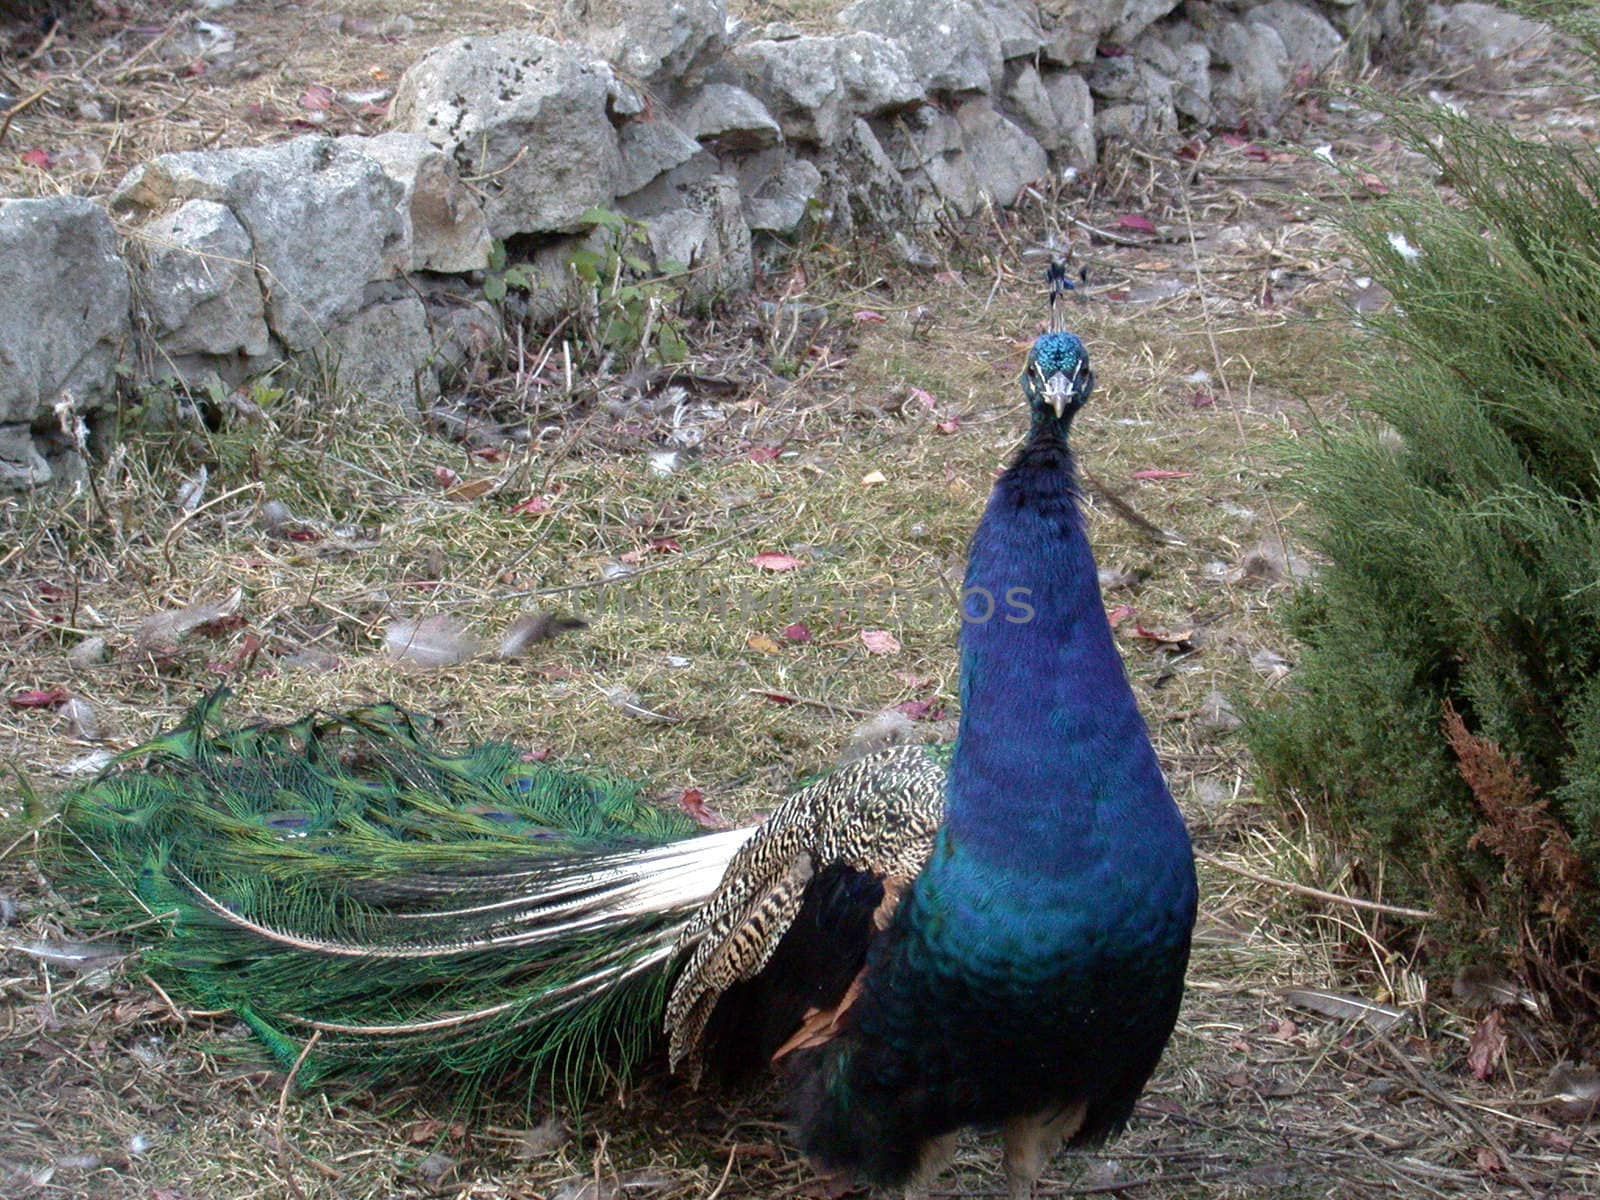 The peacock in zoo